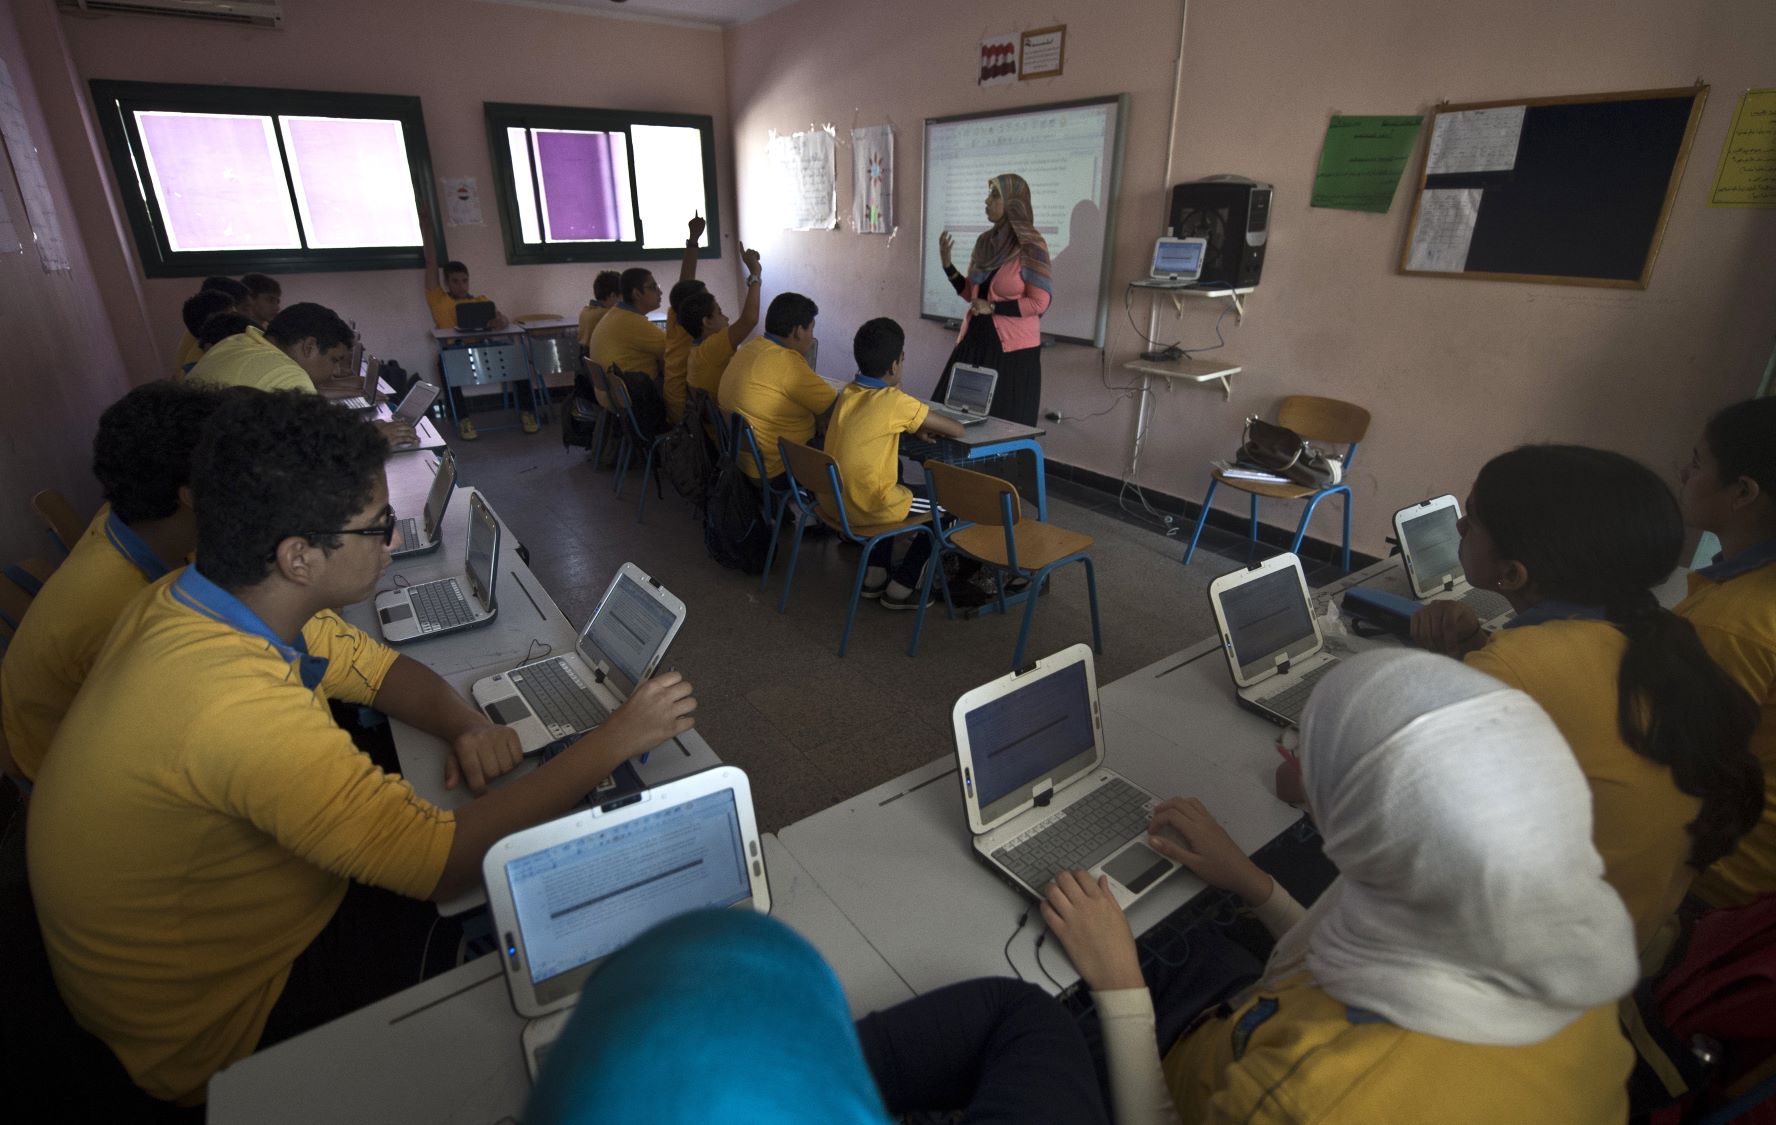 Egyptian students attend a secondary school class at a private school in Cairo on October 23, 2013. (File photo/AFP)